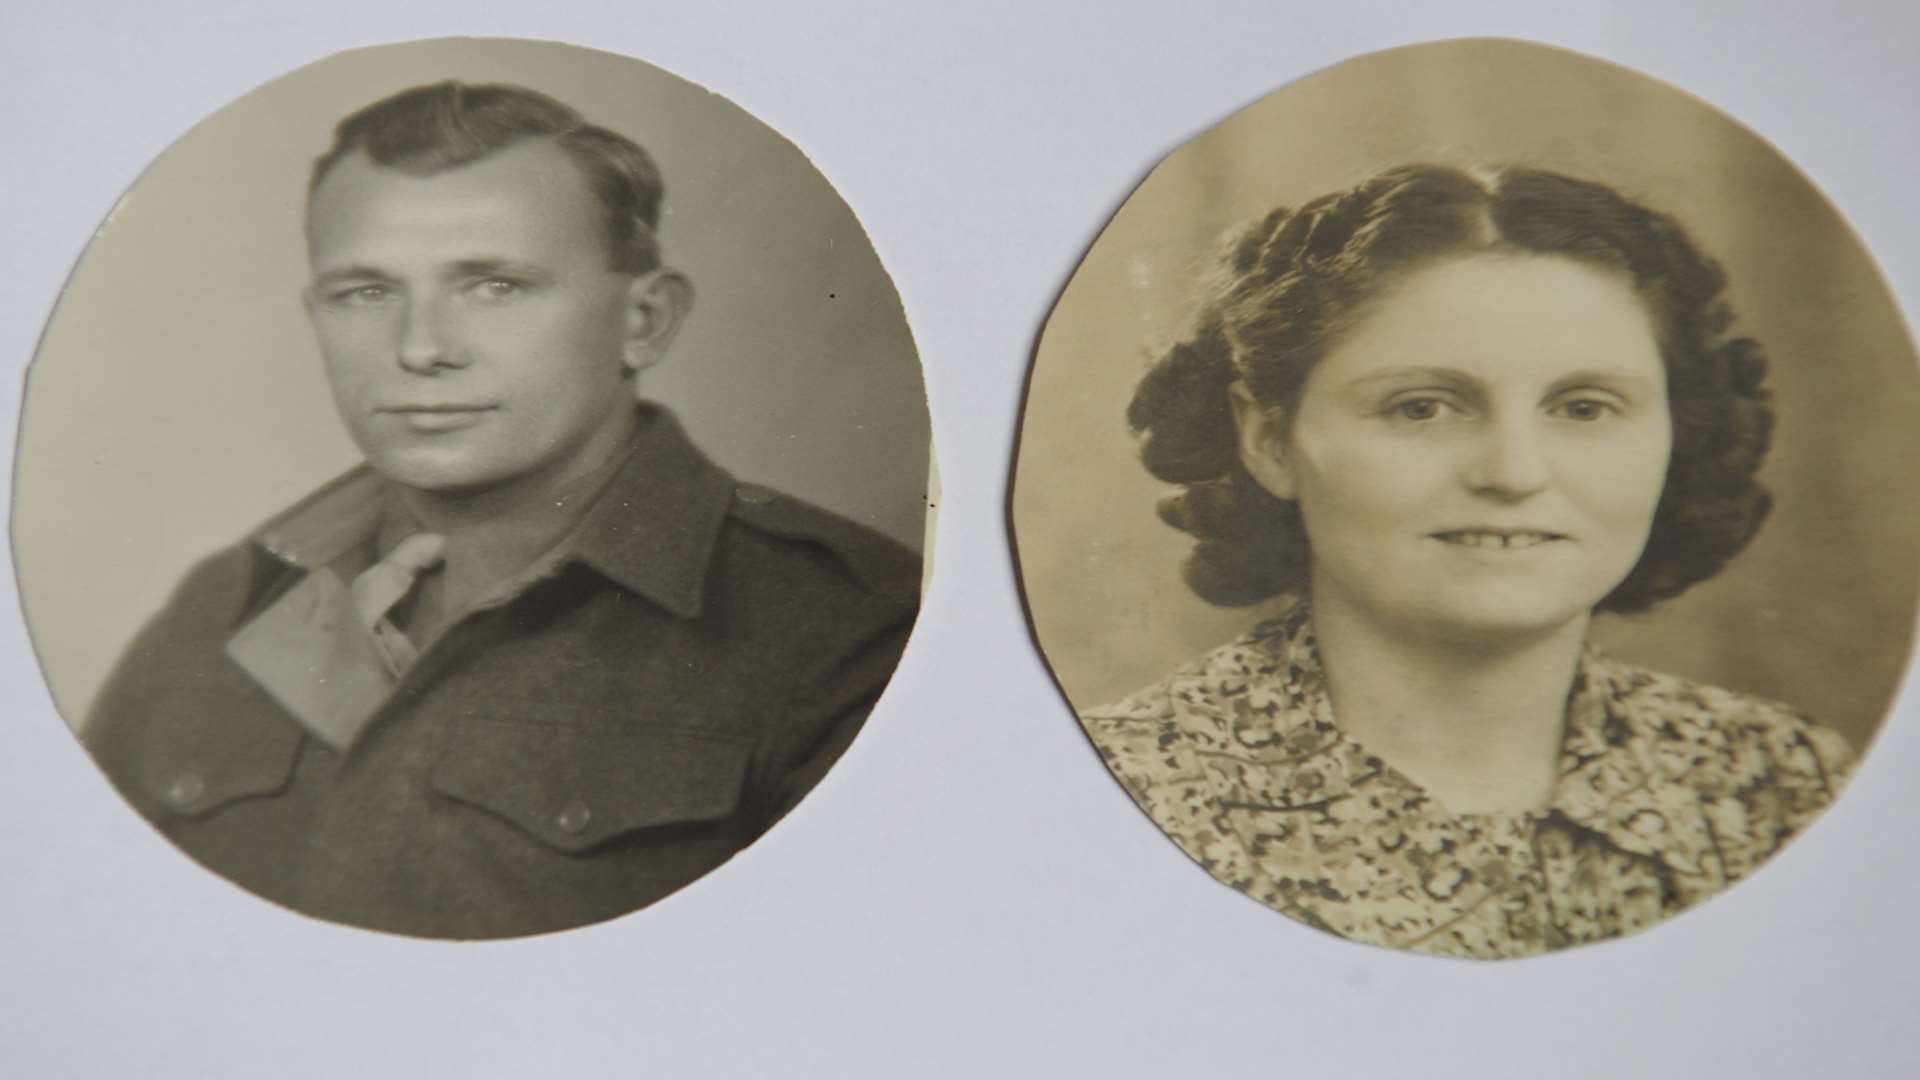 Joyce and Frank Dodd were married for 77 years